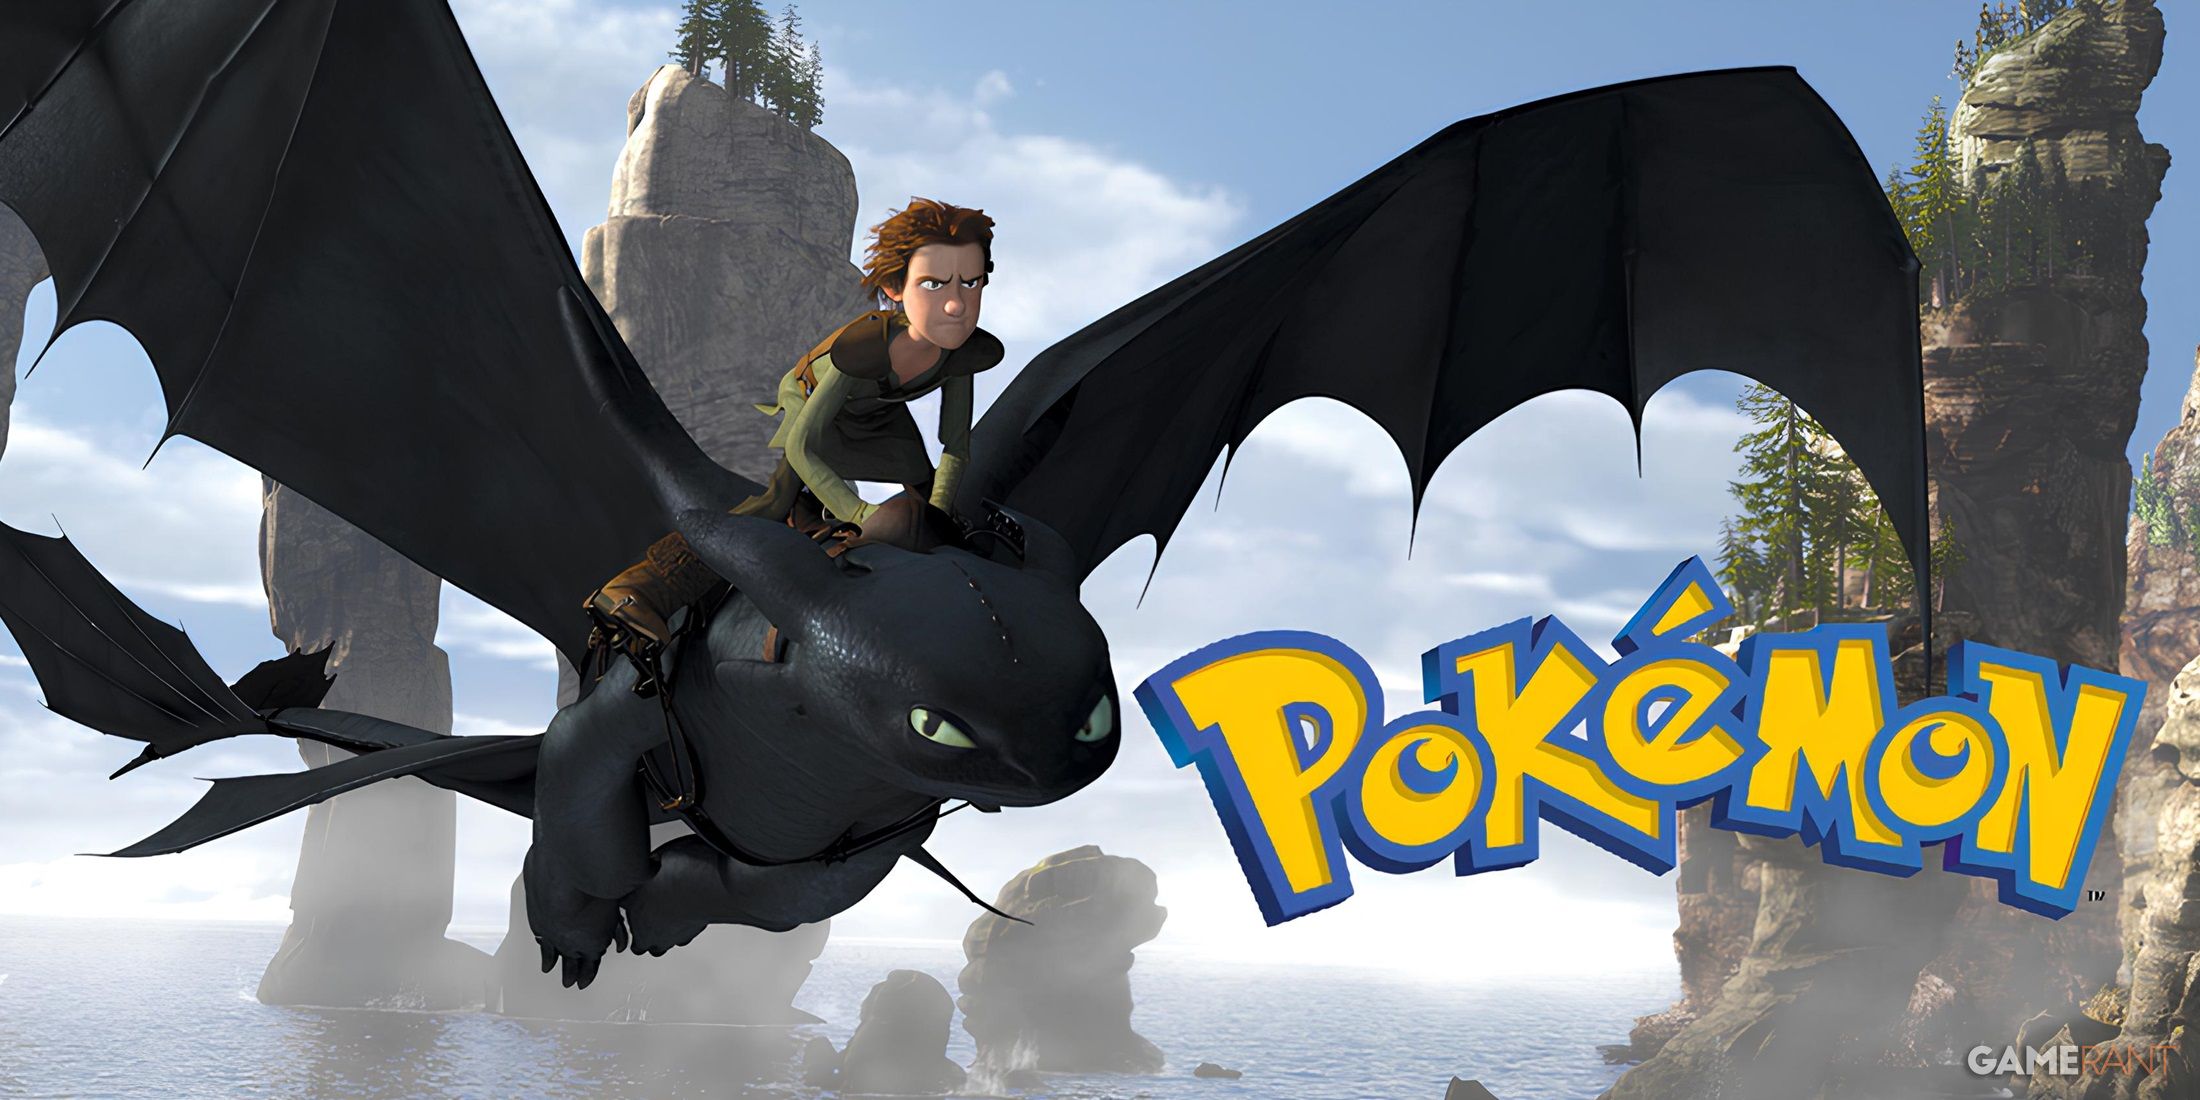 Artists Designs More Pokemon in How to Train Your Dragon Art Style